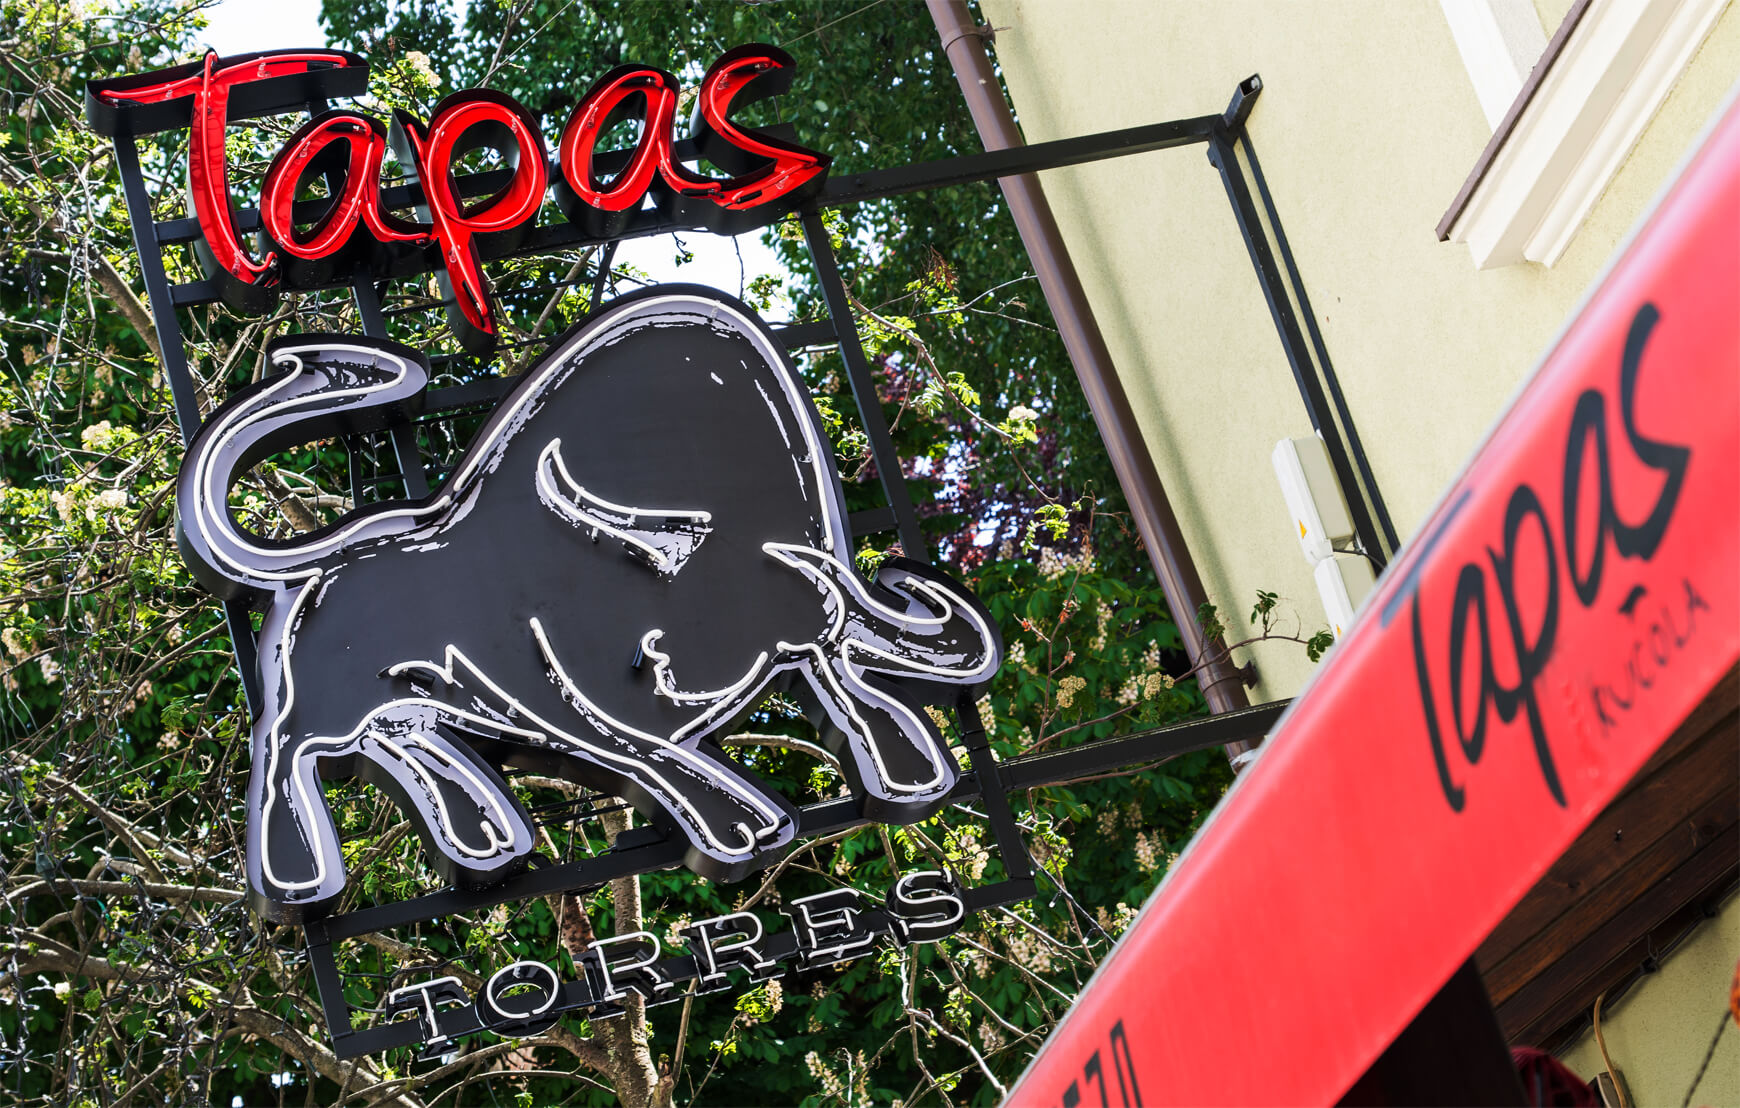 Tapas torres - neon-tapas-torres-byk-neon-above-entry-to-the-restaurant-neon-sub-illuminated-neon-spatial-neon-at-height-neon-on-a-base-logo-neon-sopot-spainese-restaurant